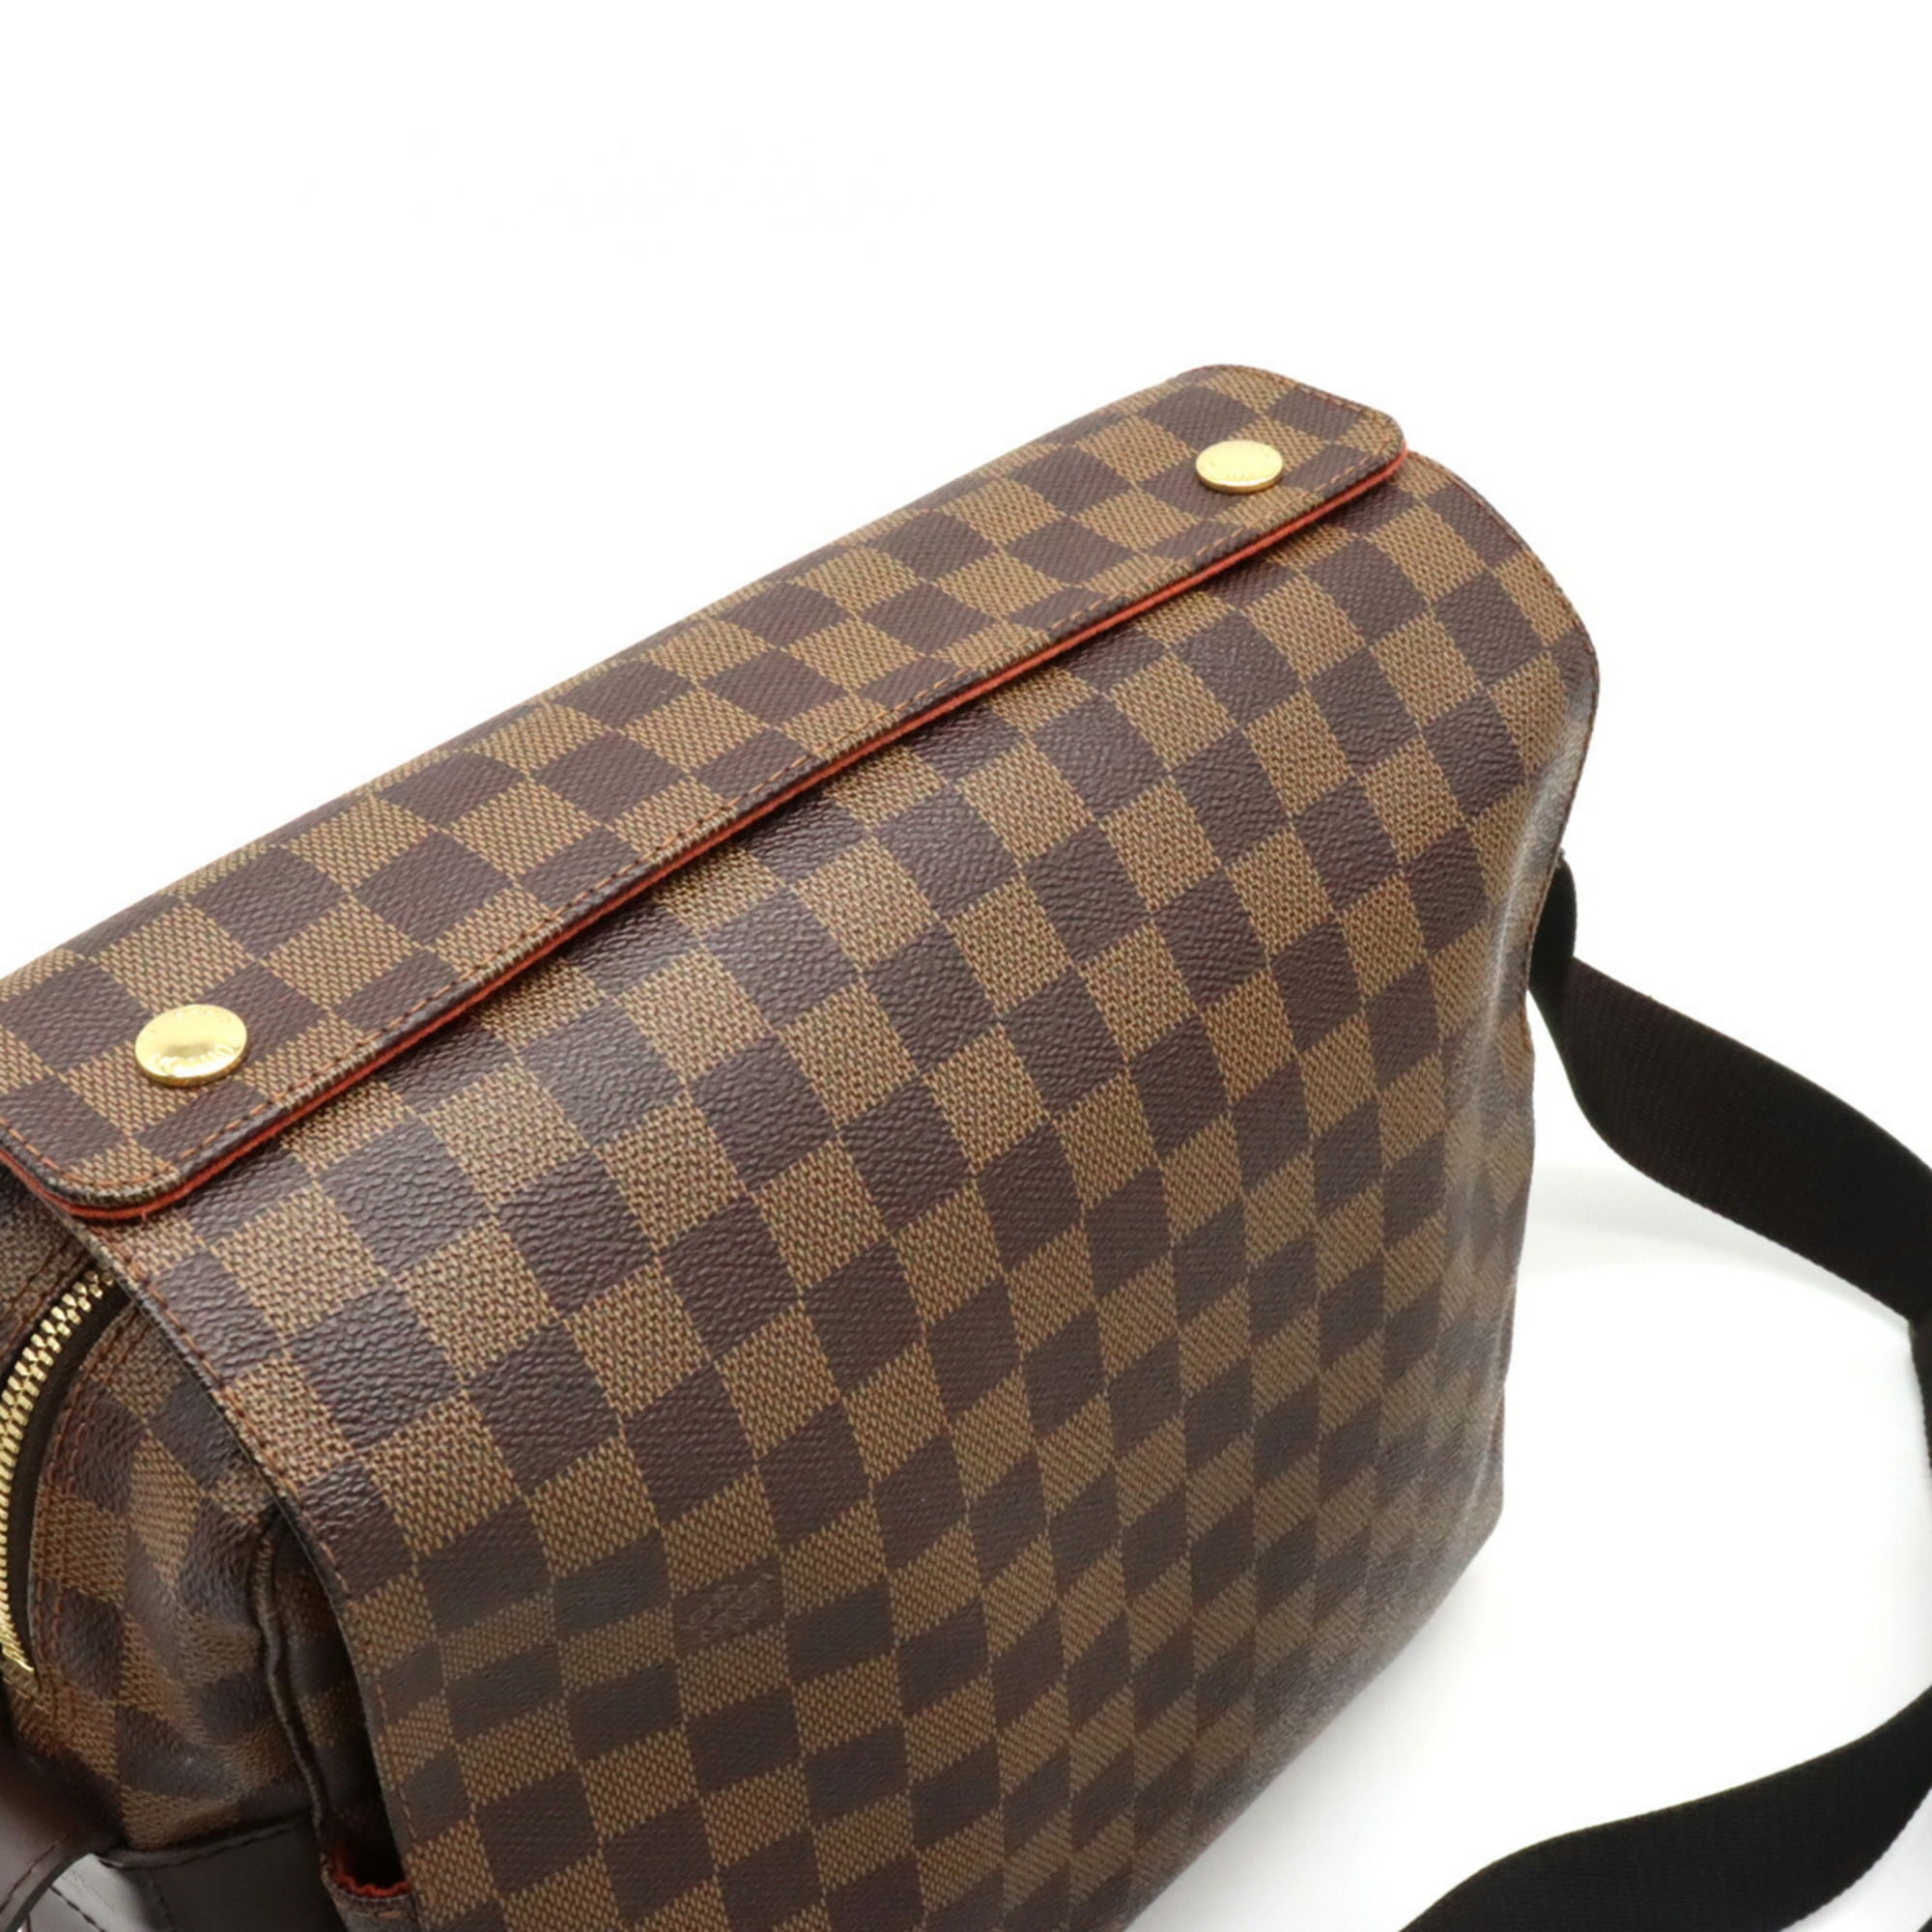 Authentic Louis Vuitton Naviglio Messenger Bag N45255 used once Mint  Condition*